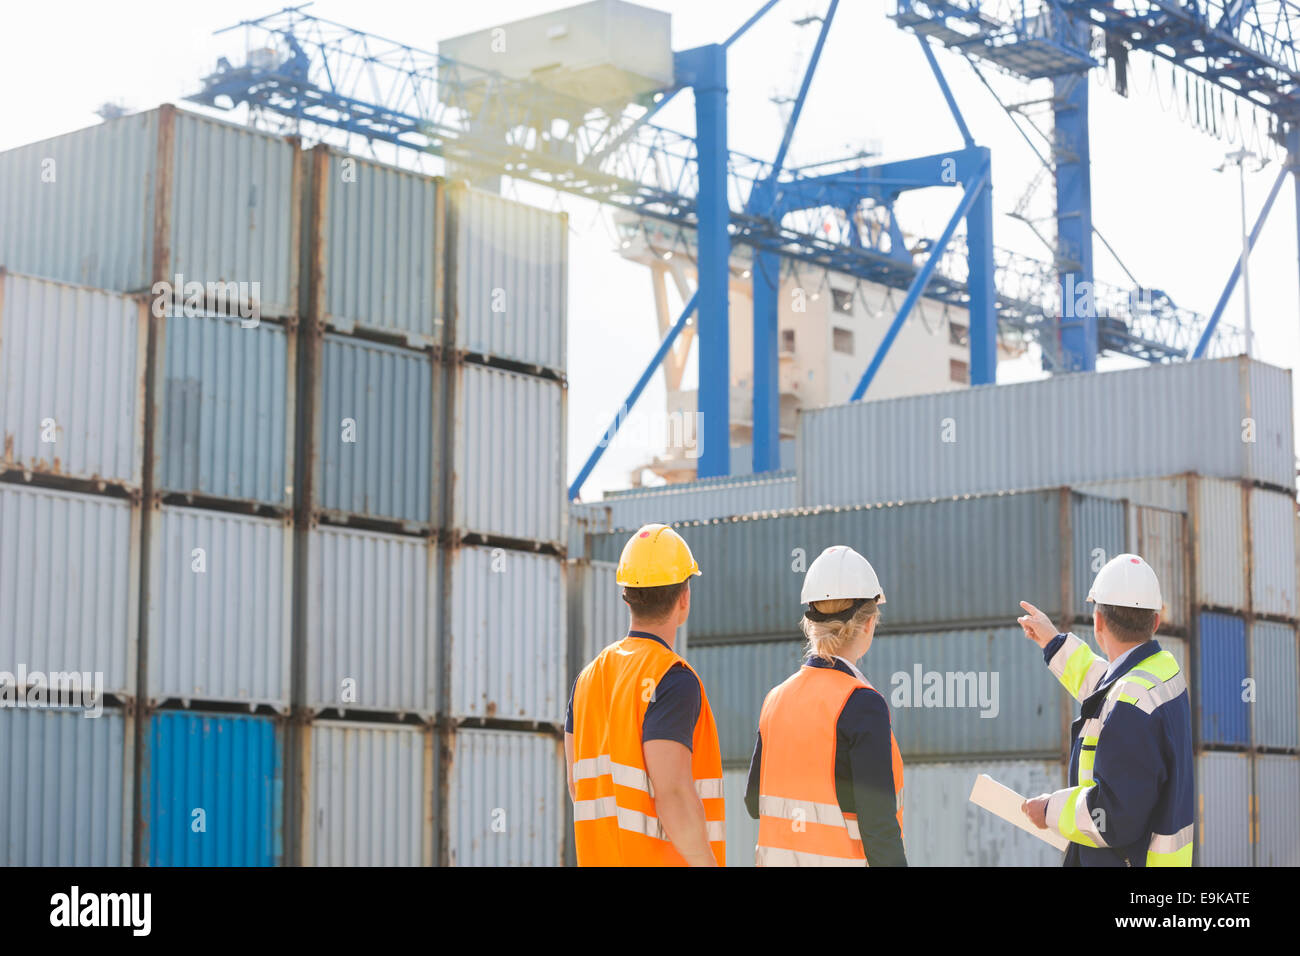 Rear view of workers inspecting cargo containers in shipping yard Stock Photo